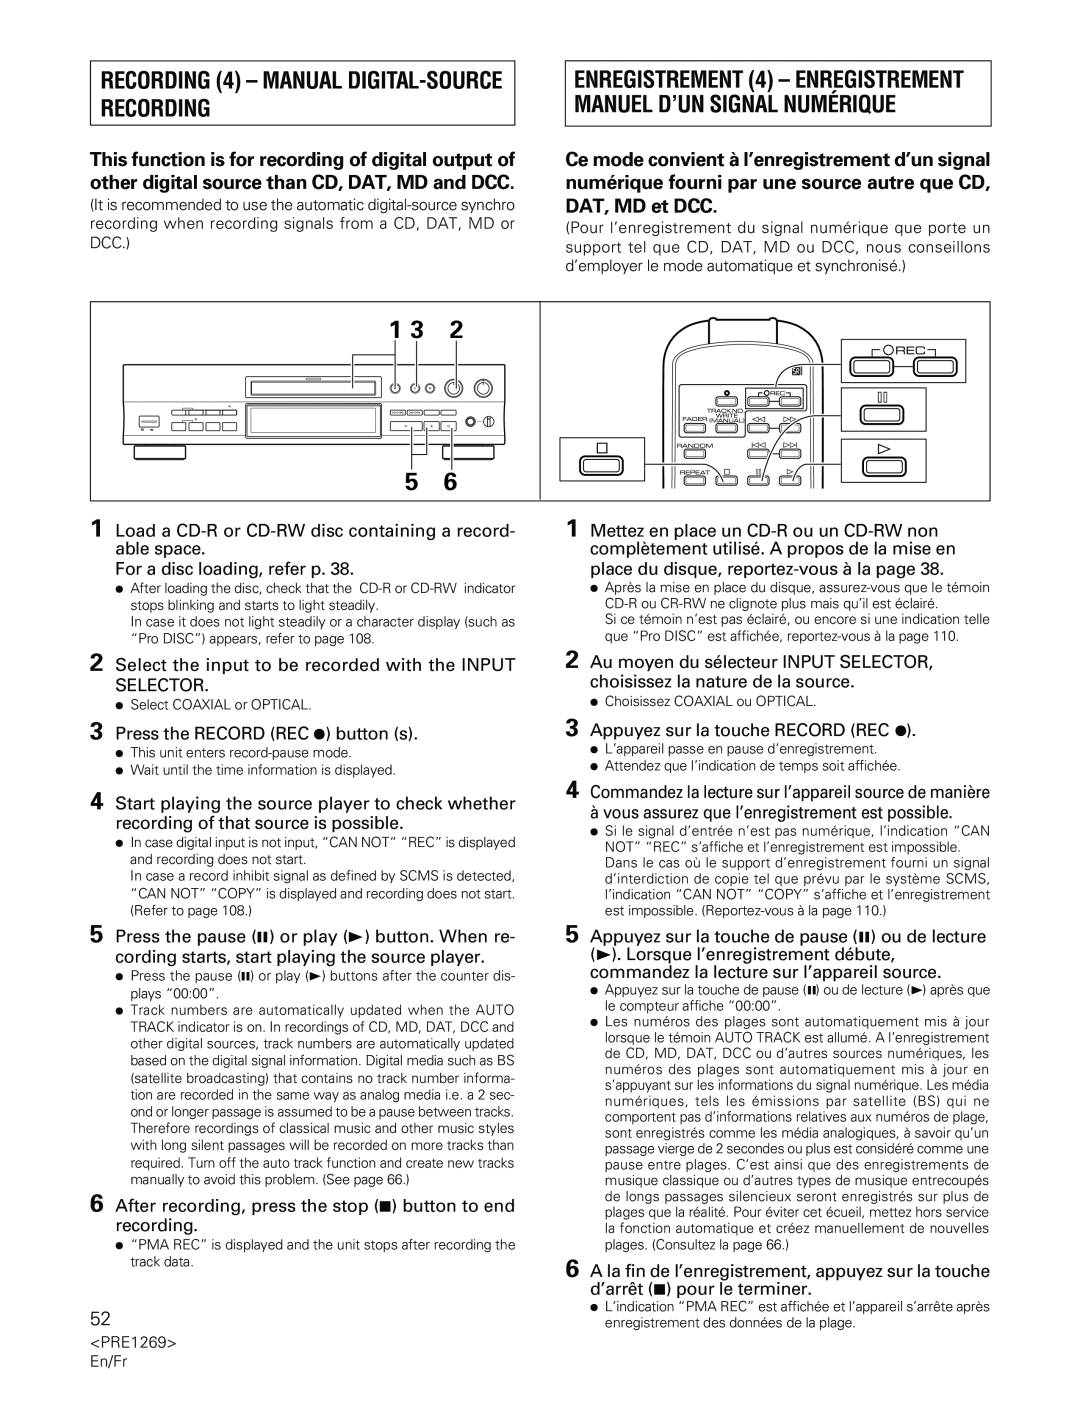 Pioneer PDR-555RW operating instructions RECORDING 4 – MANUAL DIGITAL-SOURCERECORDING 